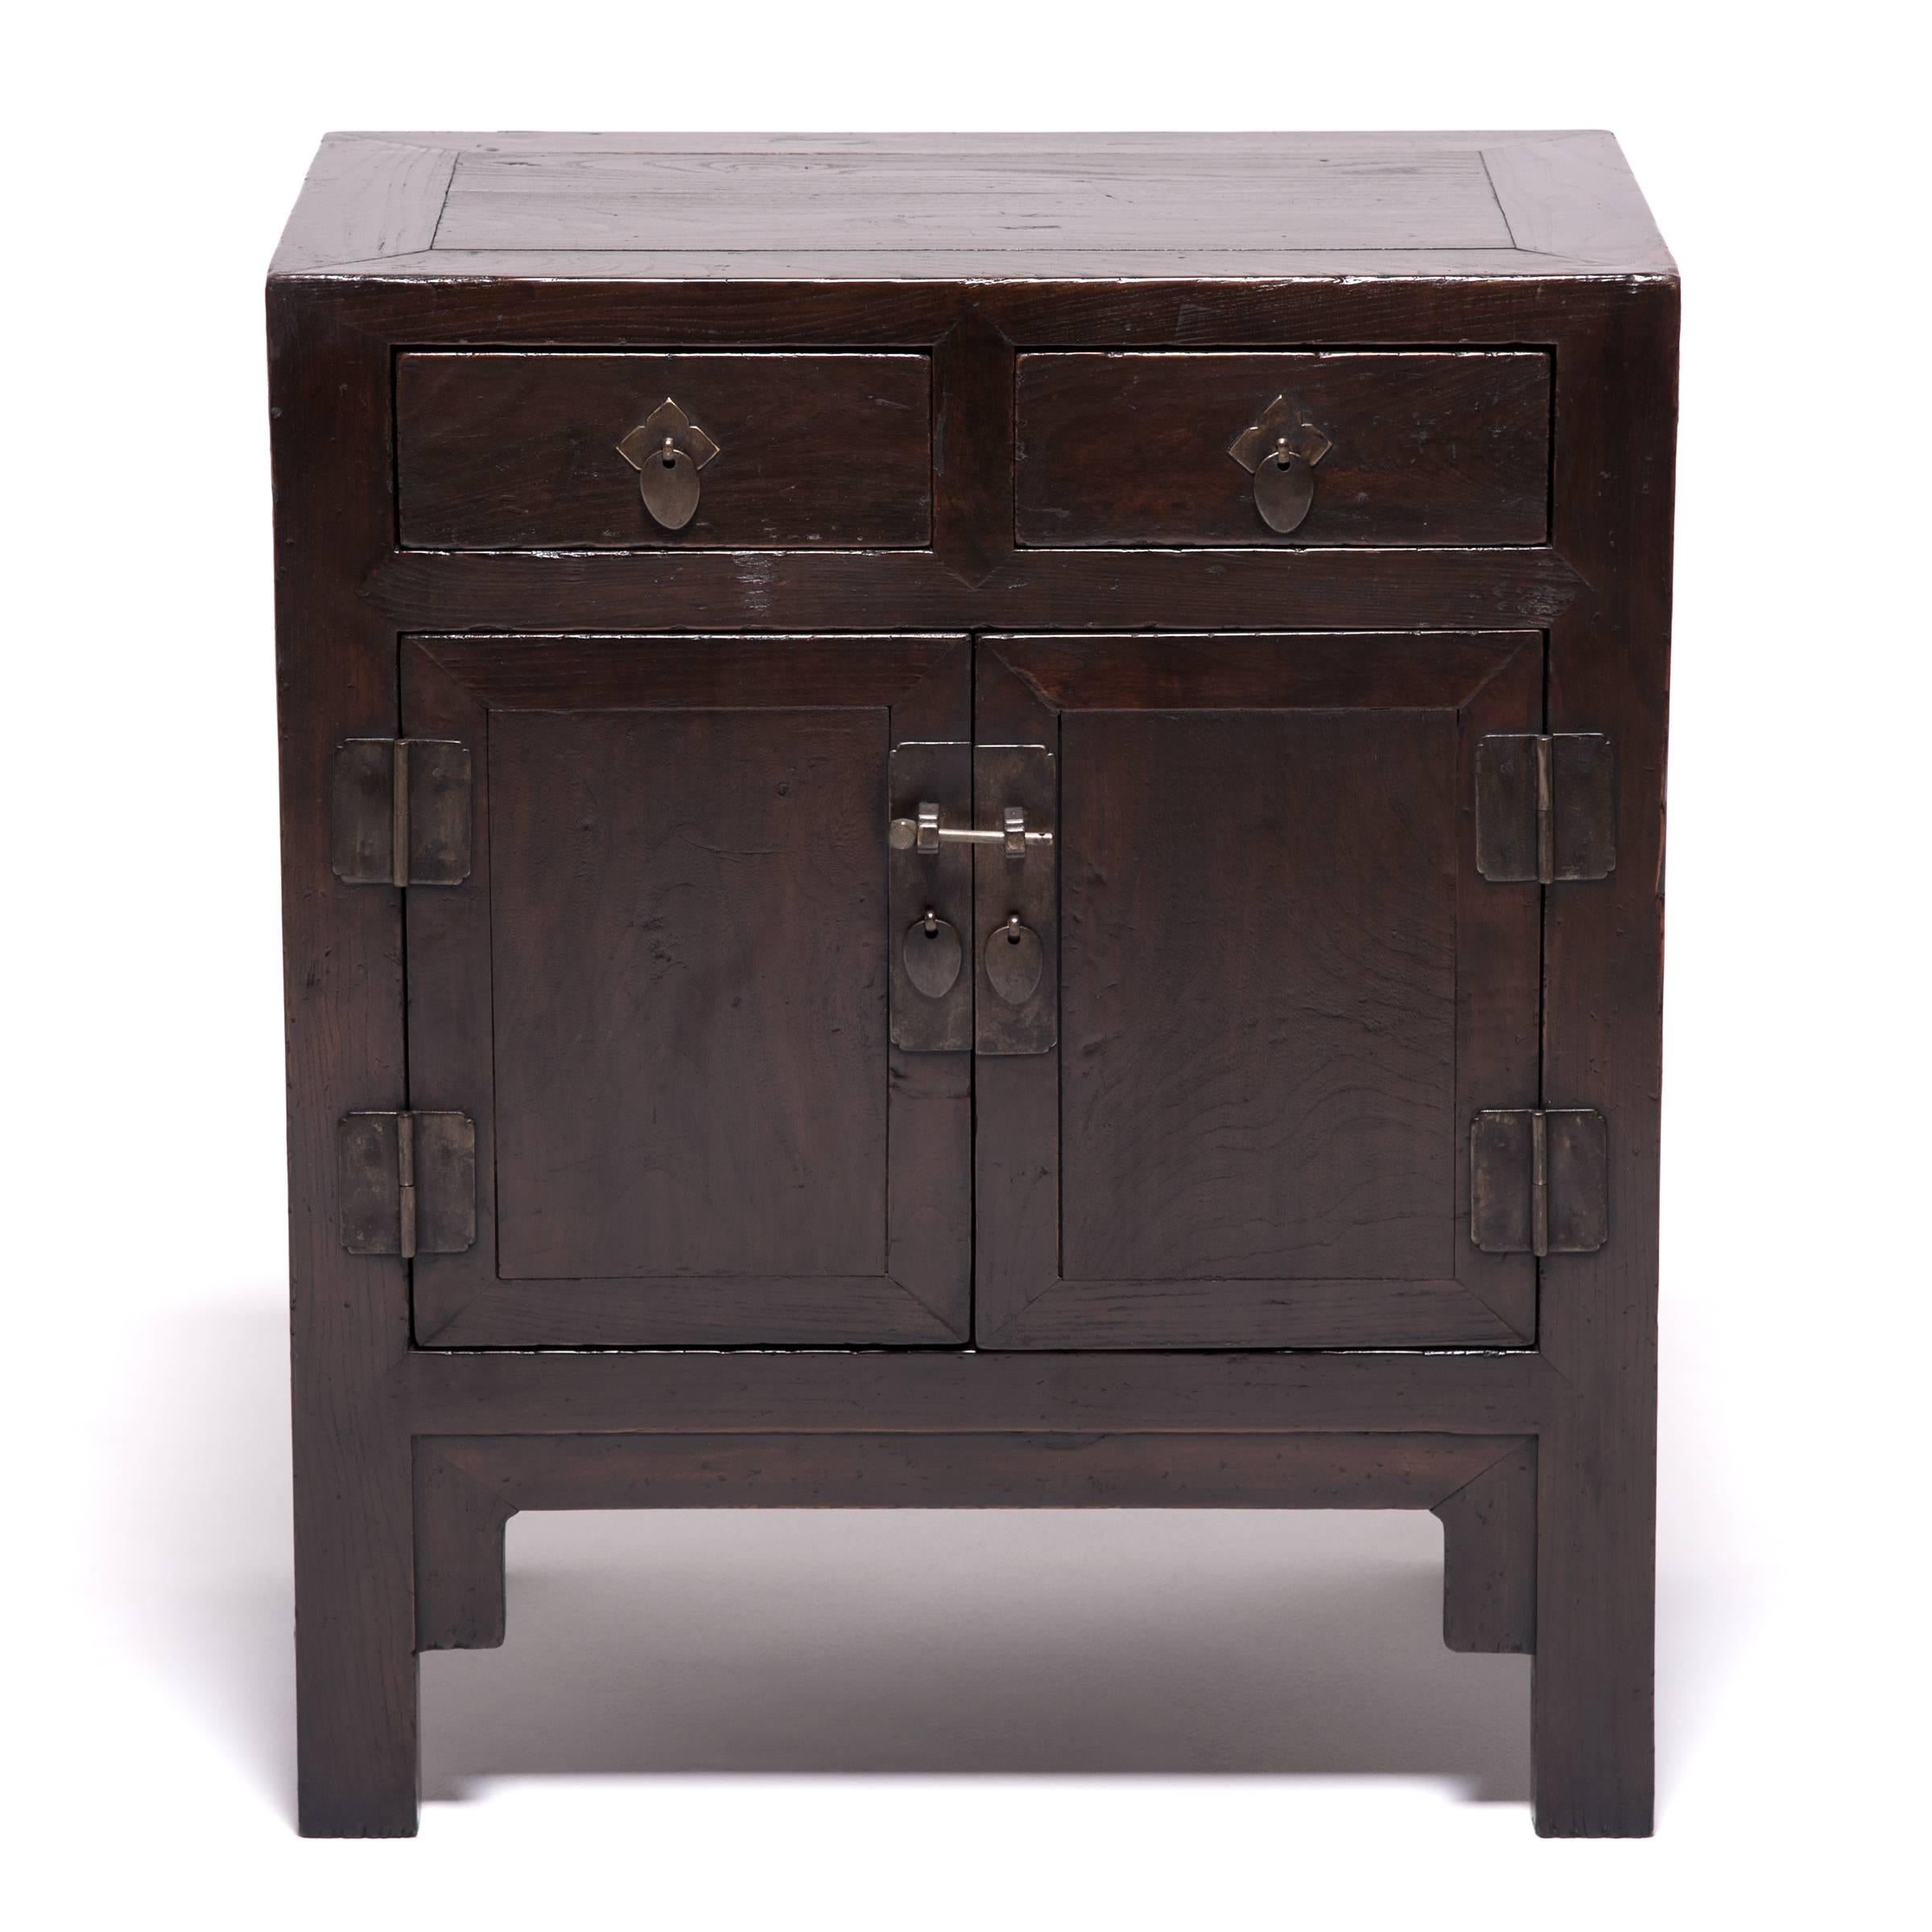 In a traditional northern Chinese home, these chests would have been placed on a low, raised platform called a kang (a type of bed) and used to store household objects. Similar to today’s modular storage trend, the matching cabinets were either